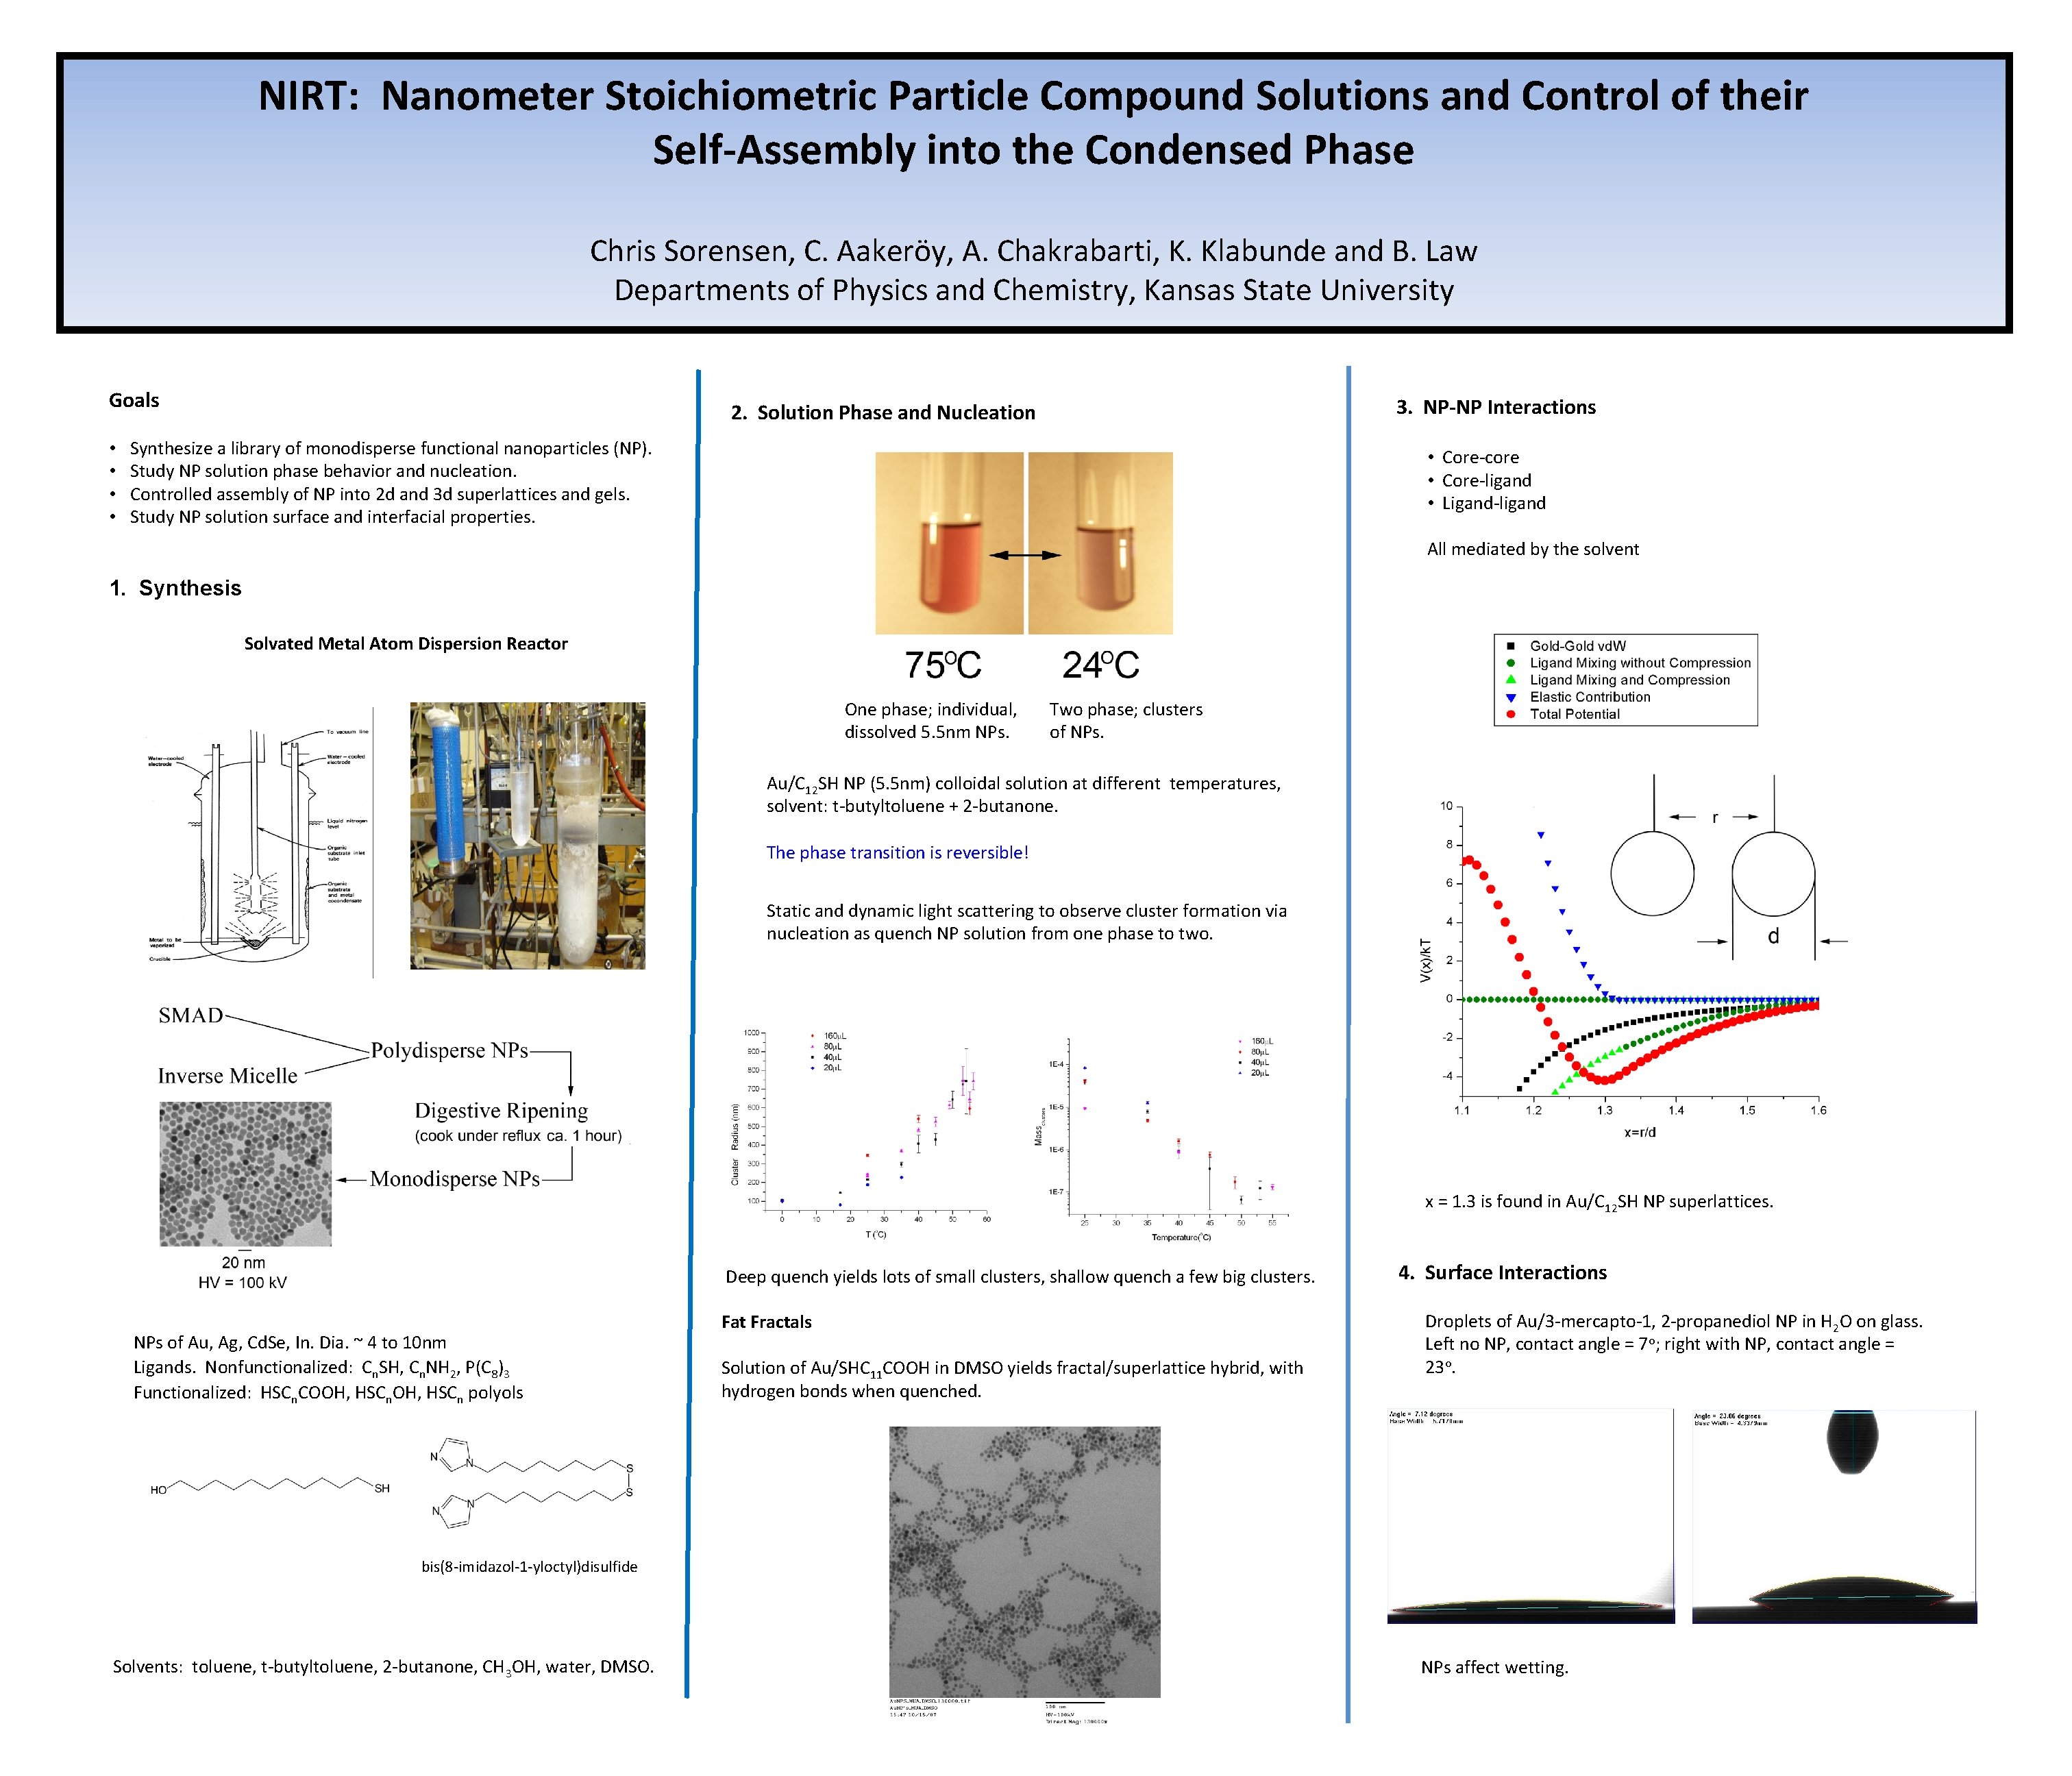 NIRT: Nanometer Stoichiometric Particle Compound Solutions and Control of their Self-Assembly into the Condensed